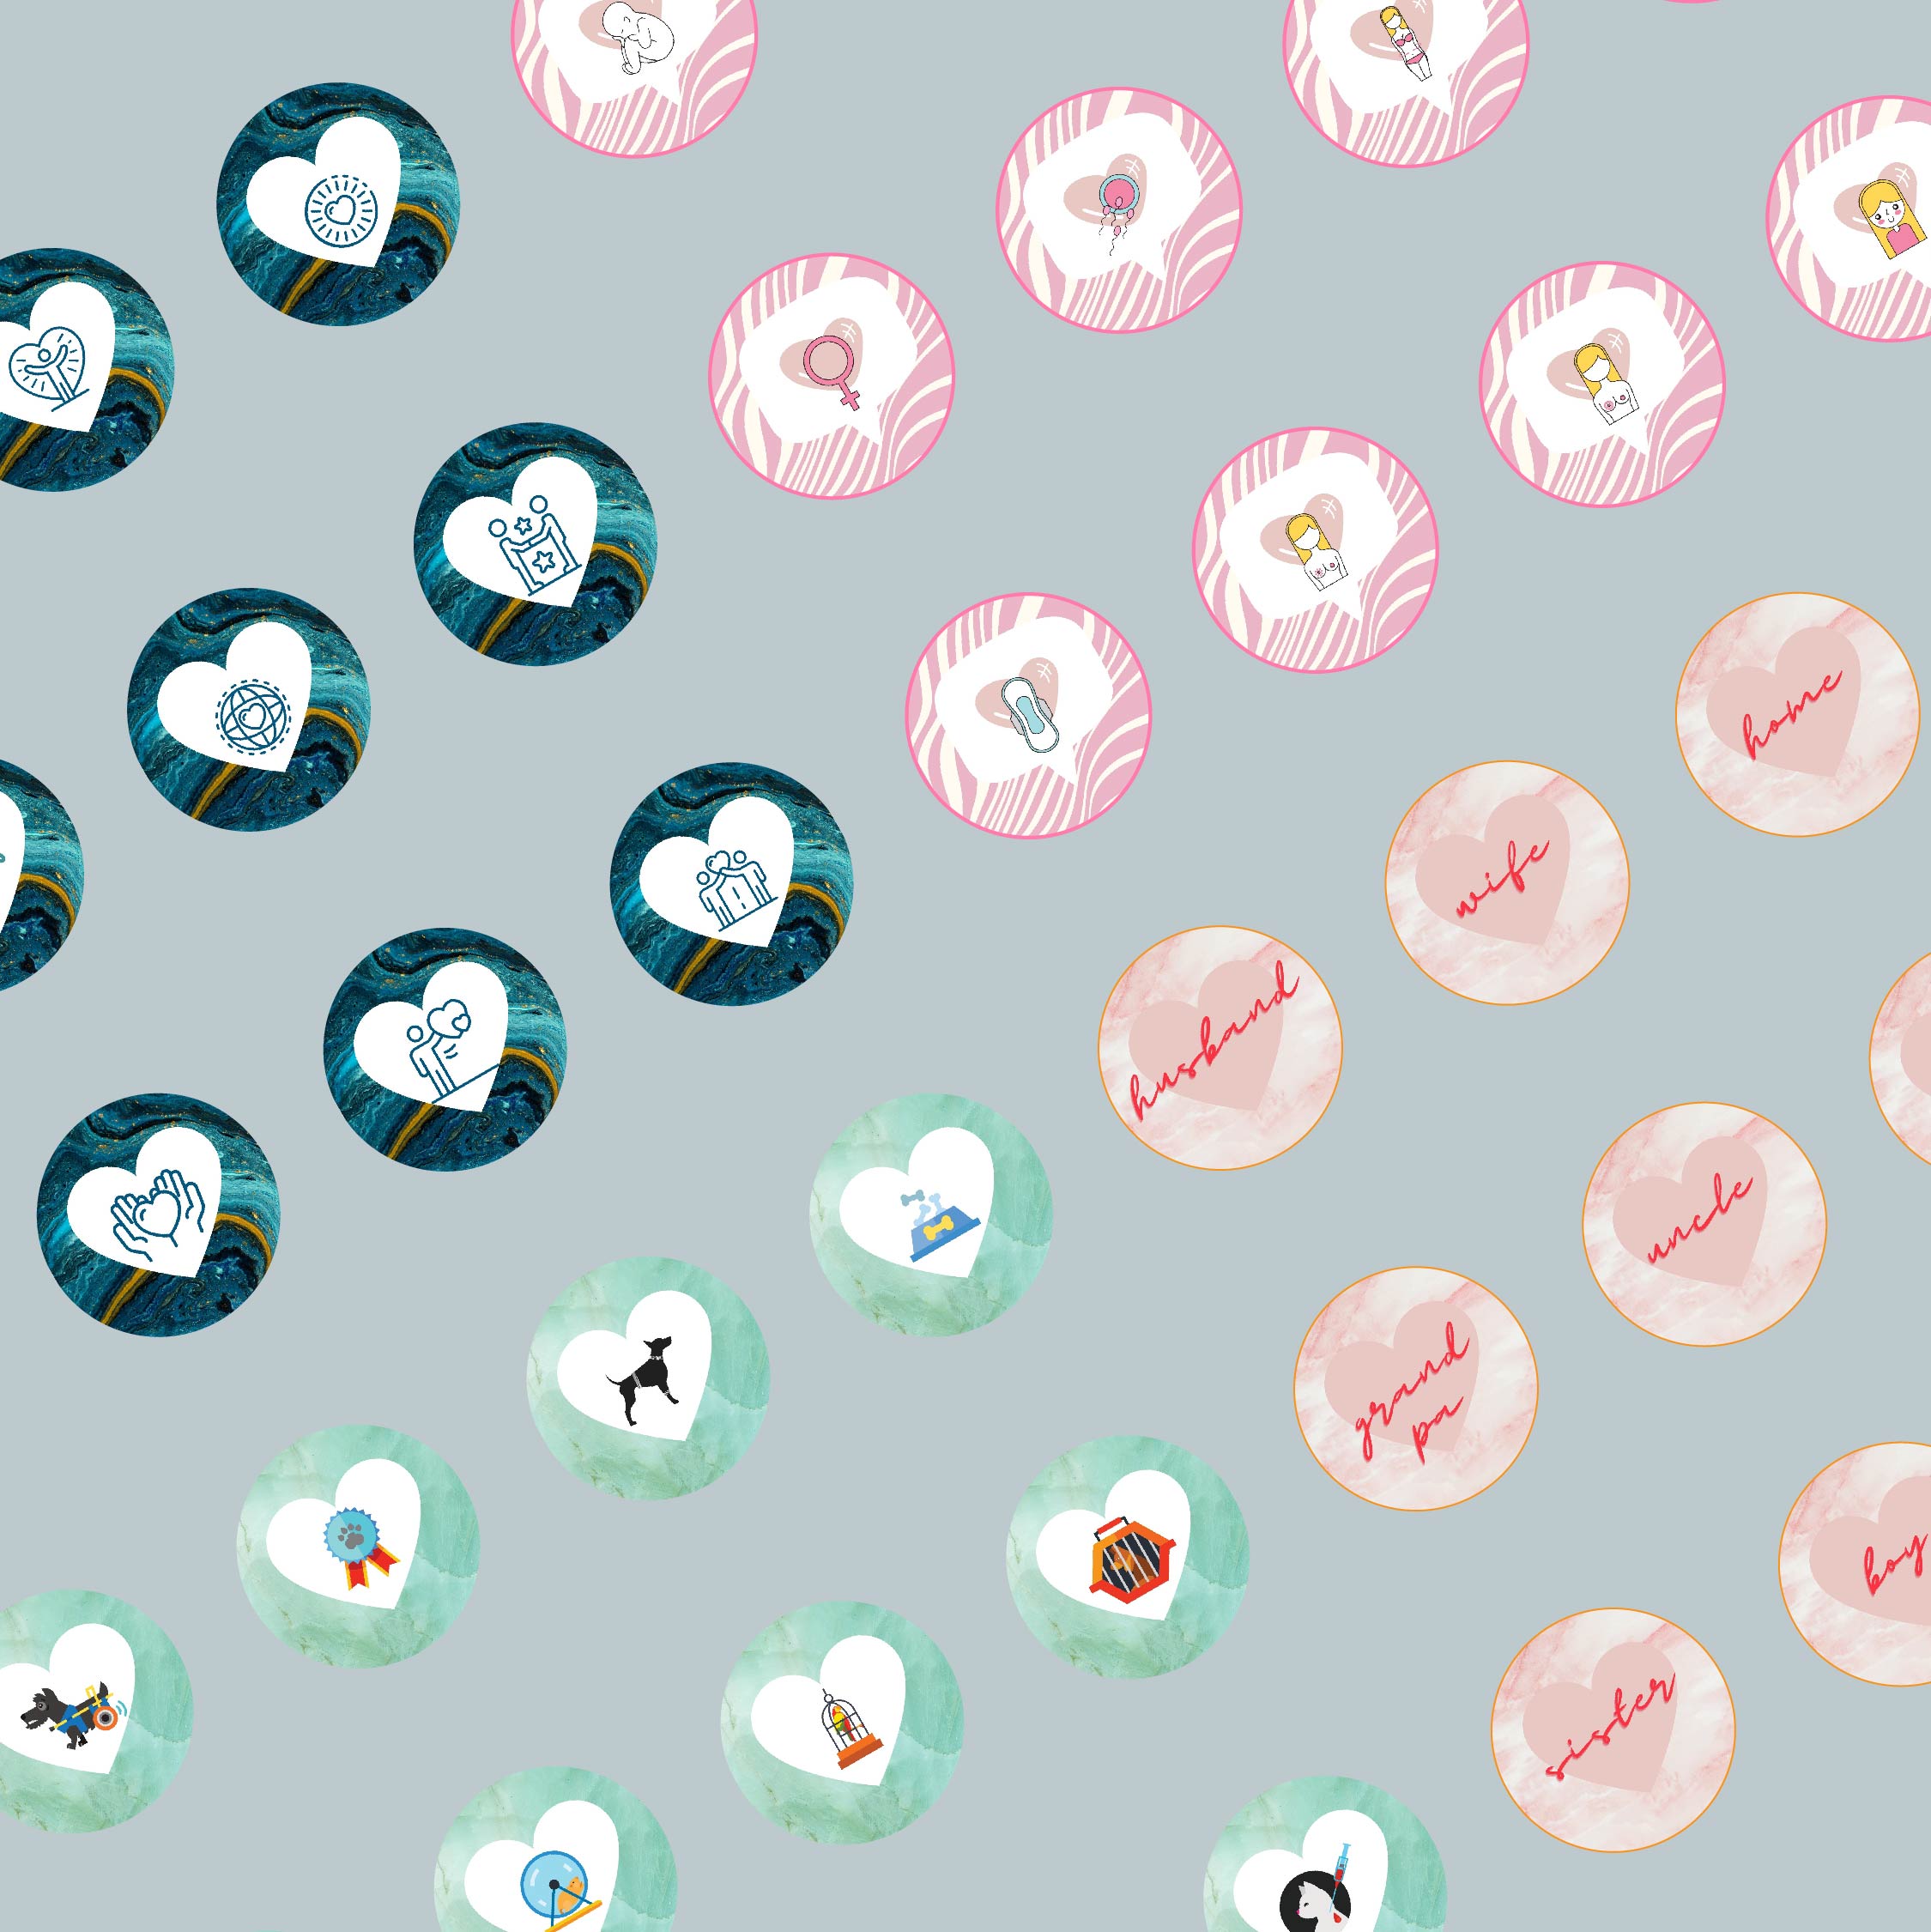 Instagram Highlight Covers Marble Heart: 100 Free Templates